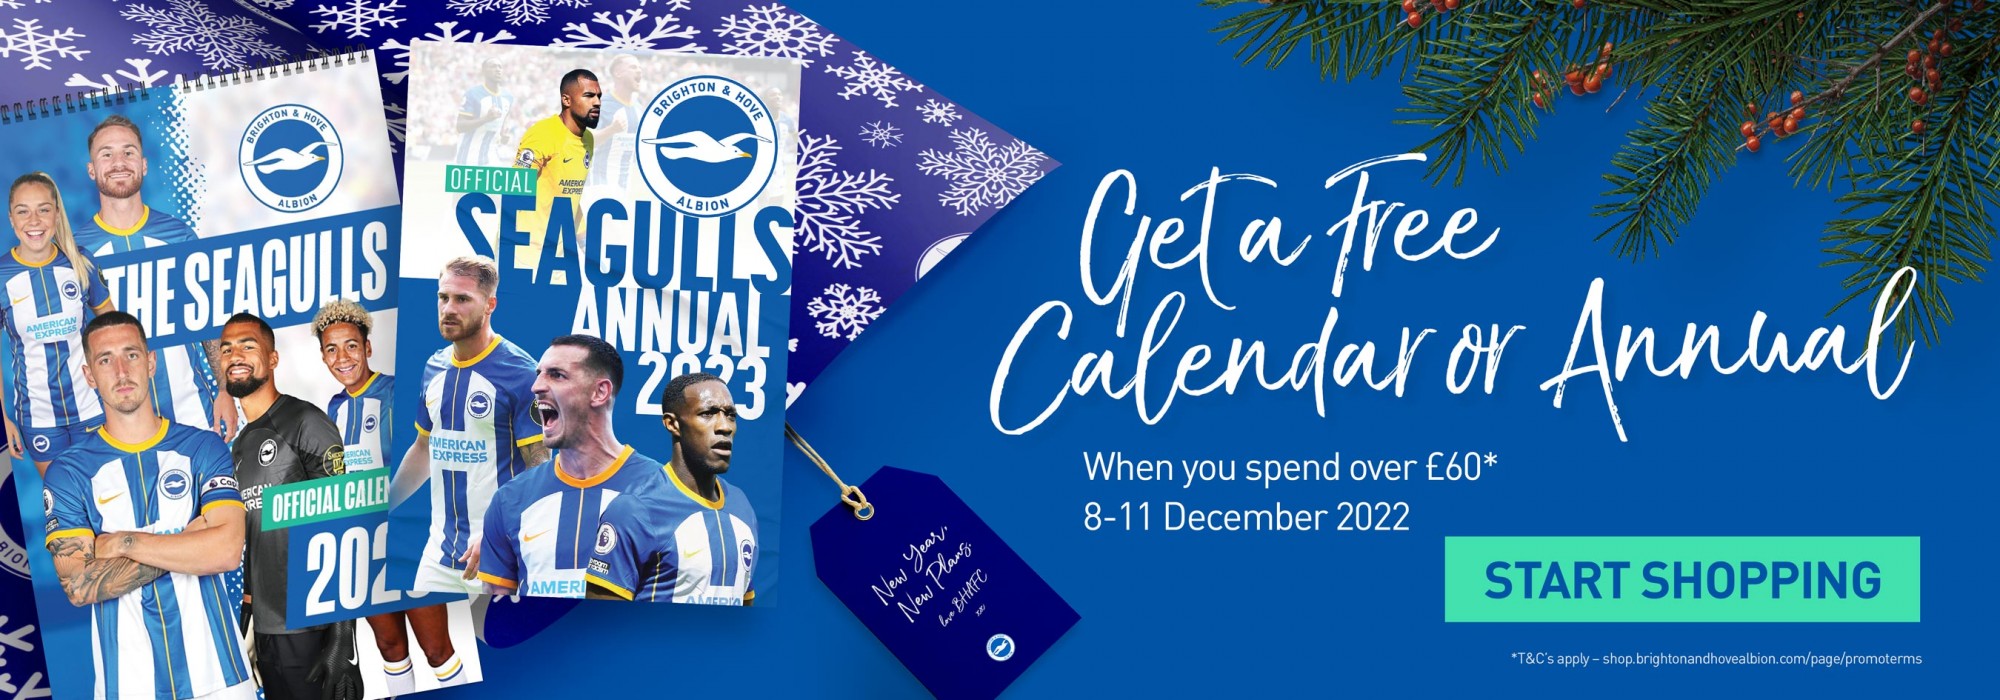 Spend over £60 and receive a free calendar or annual